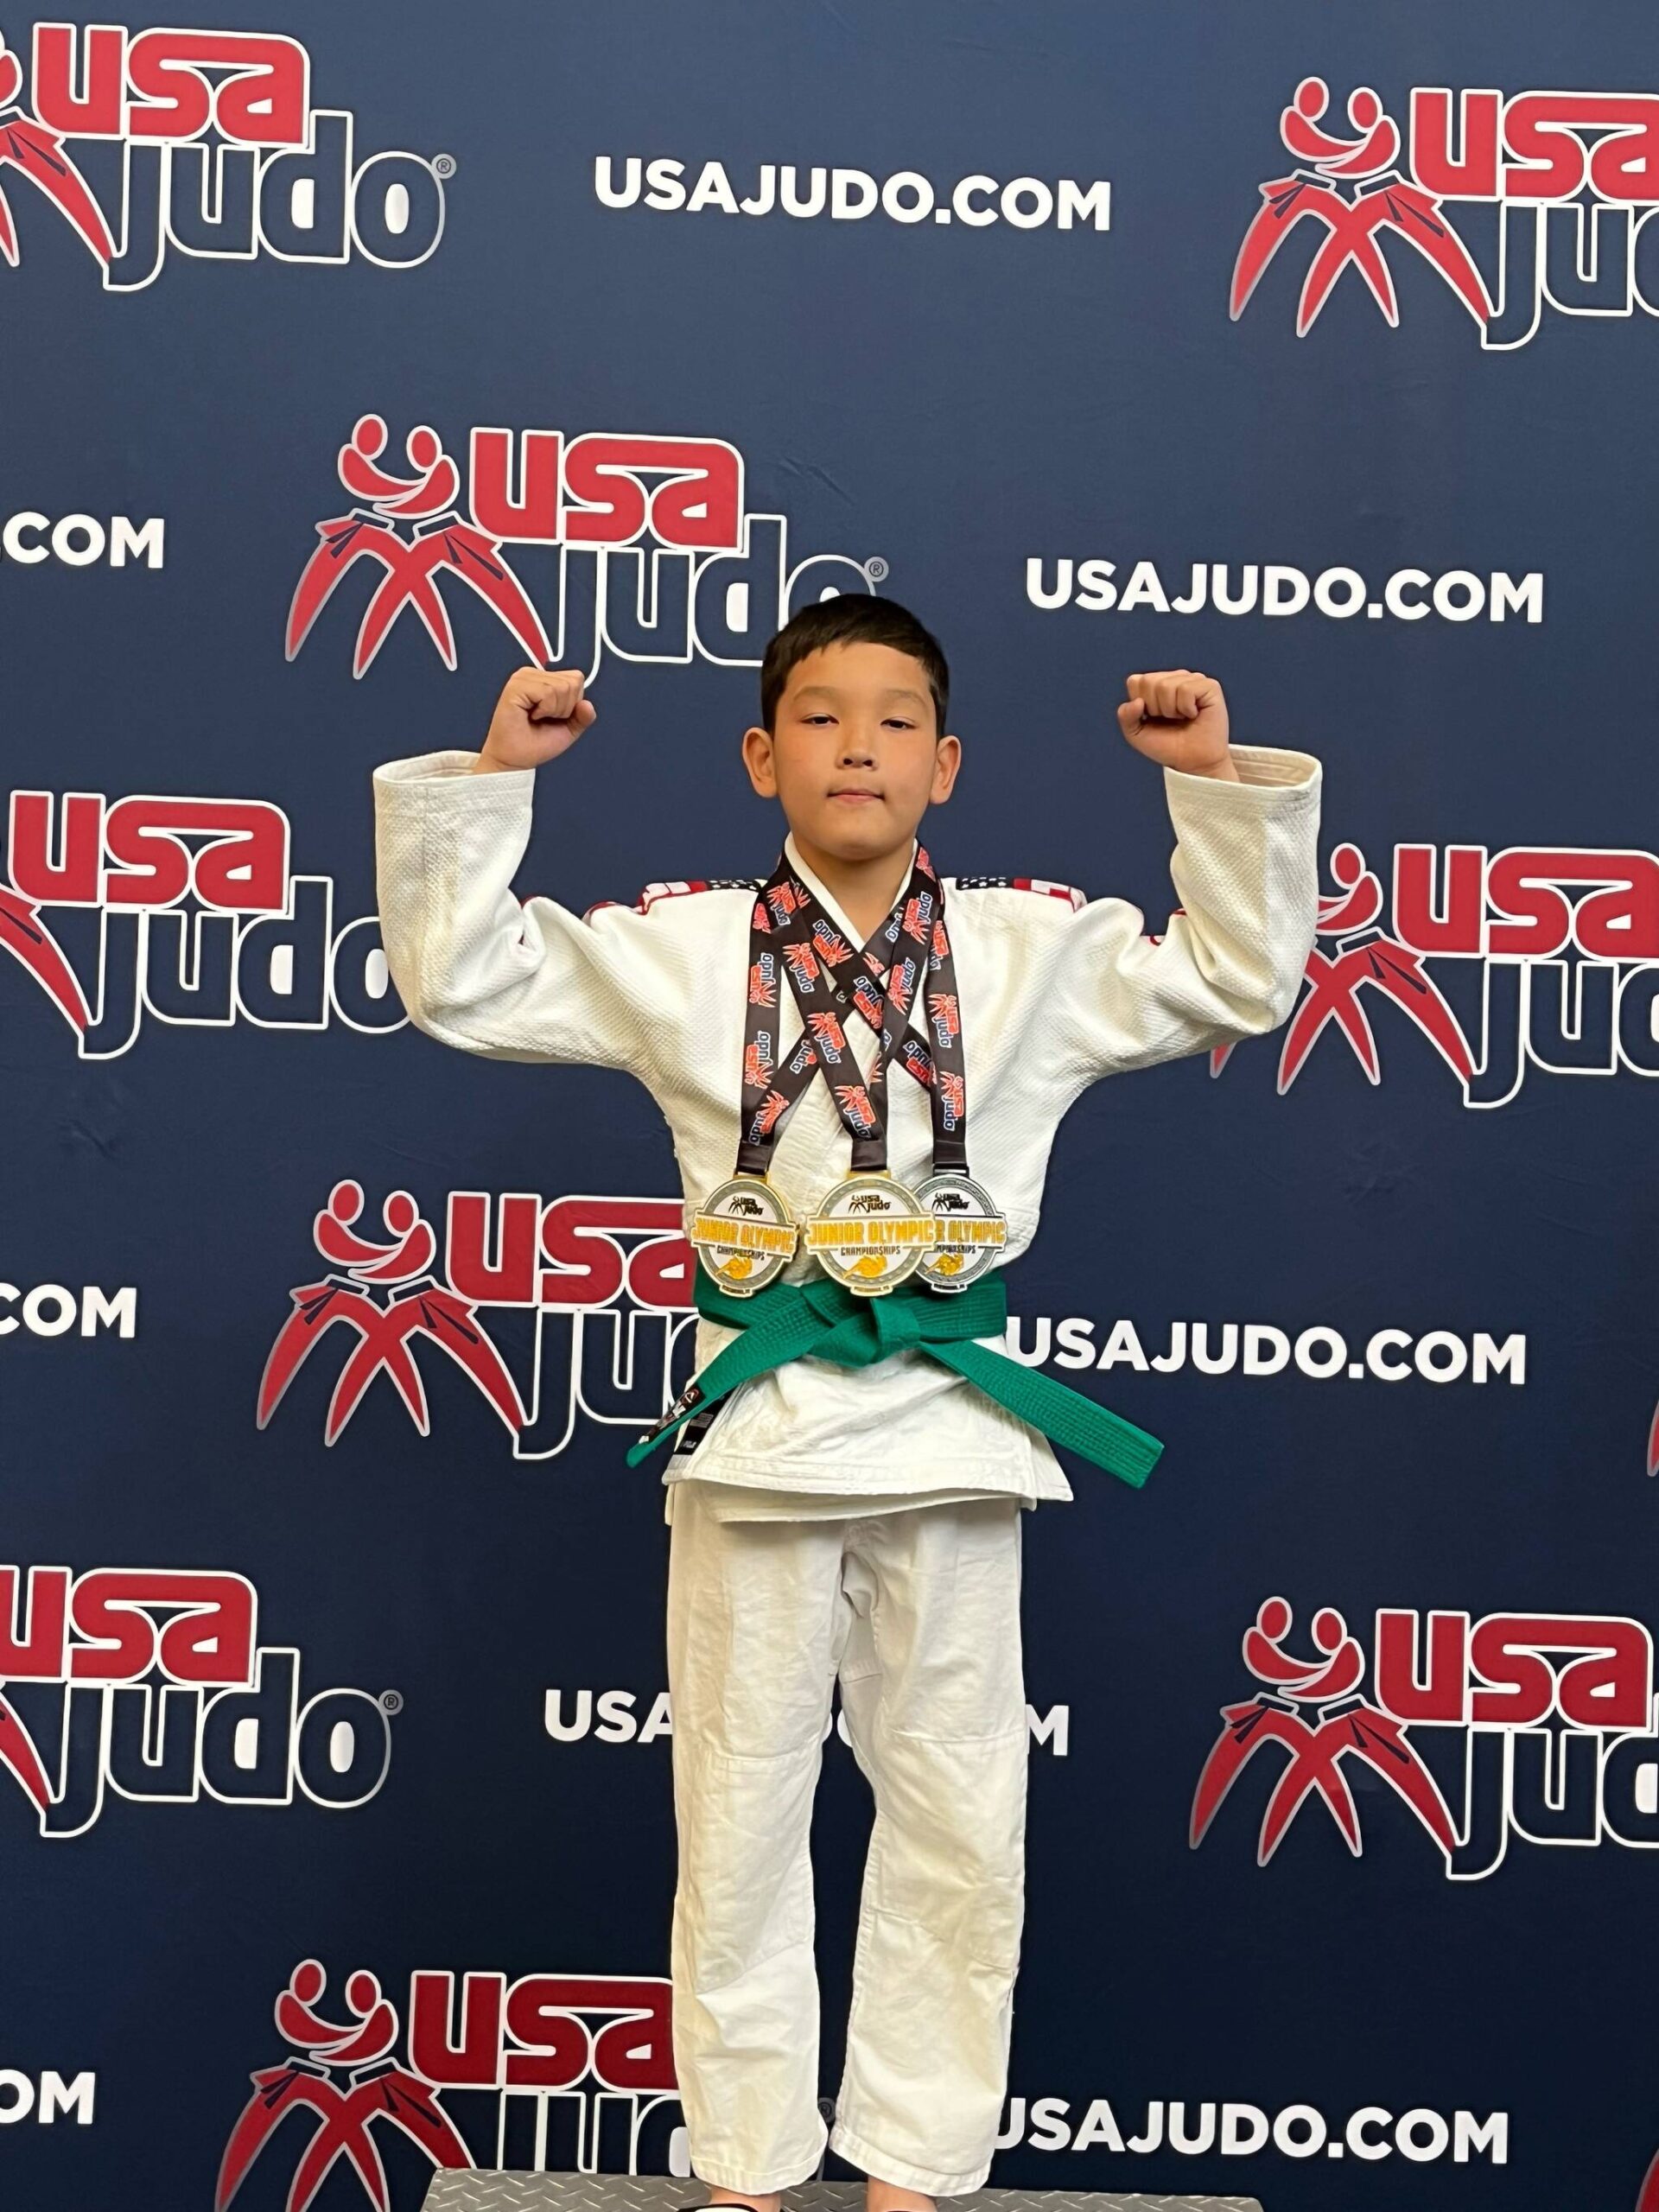 Northwood Elementary School student Mikhail Zulaev won two gold medals and one silver medal at the 2024 Junior Olympic Judo Championships that took place from June 21-23 in Pittsburgh, Pennsylvania. He notched gold in the boys 2015 Bantam 5 under 33kg and boys 2014 Bantam 6 under 35kg. He captured silver in the boys 2015 Bantam 5 under 37 kg. Courtesy photo